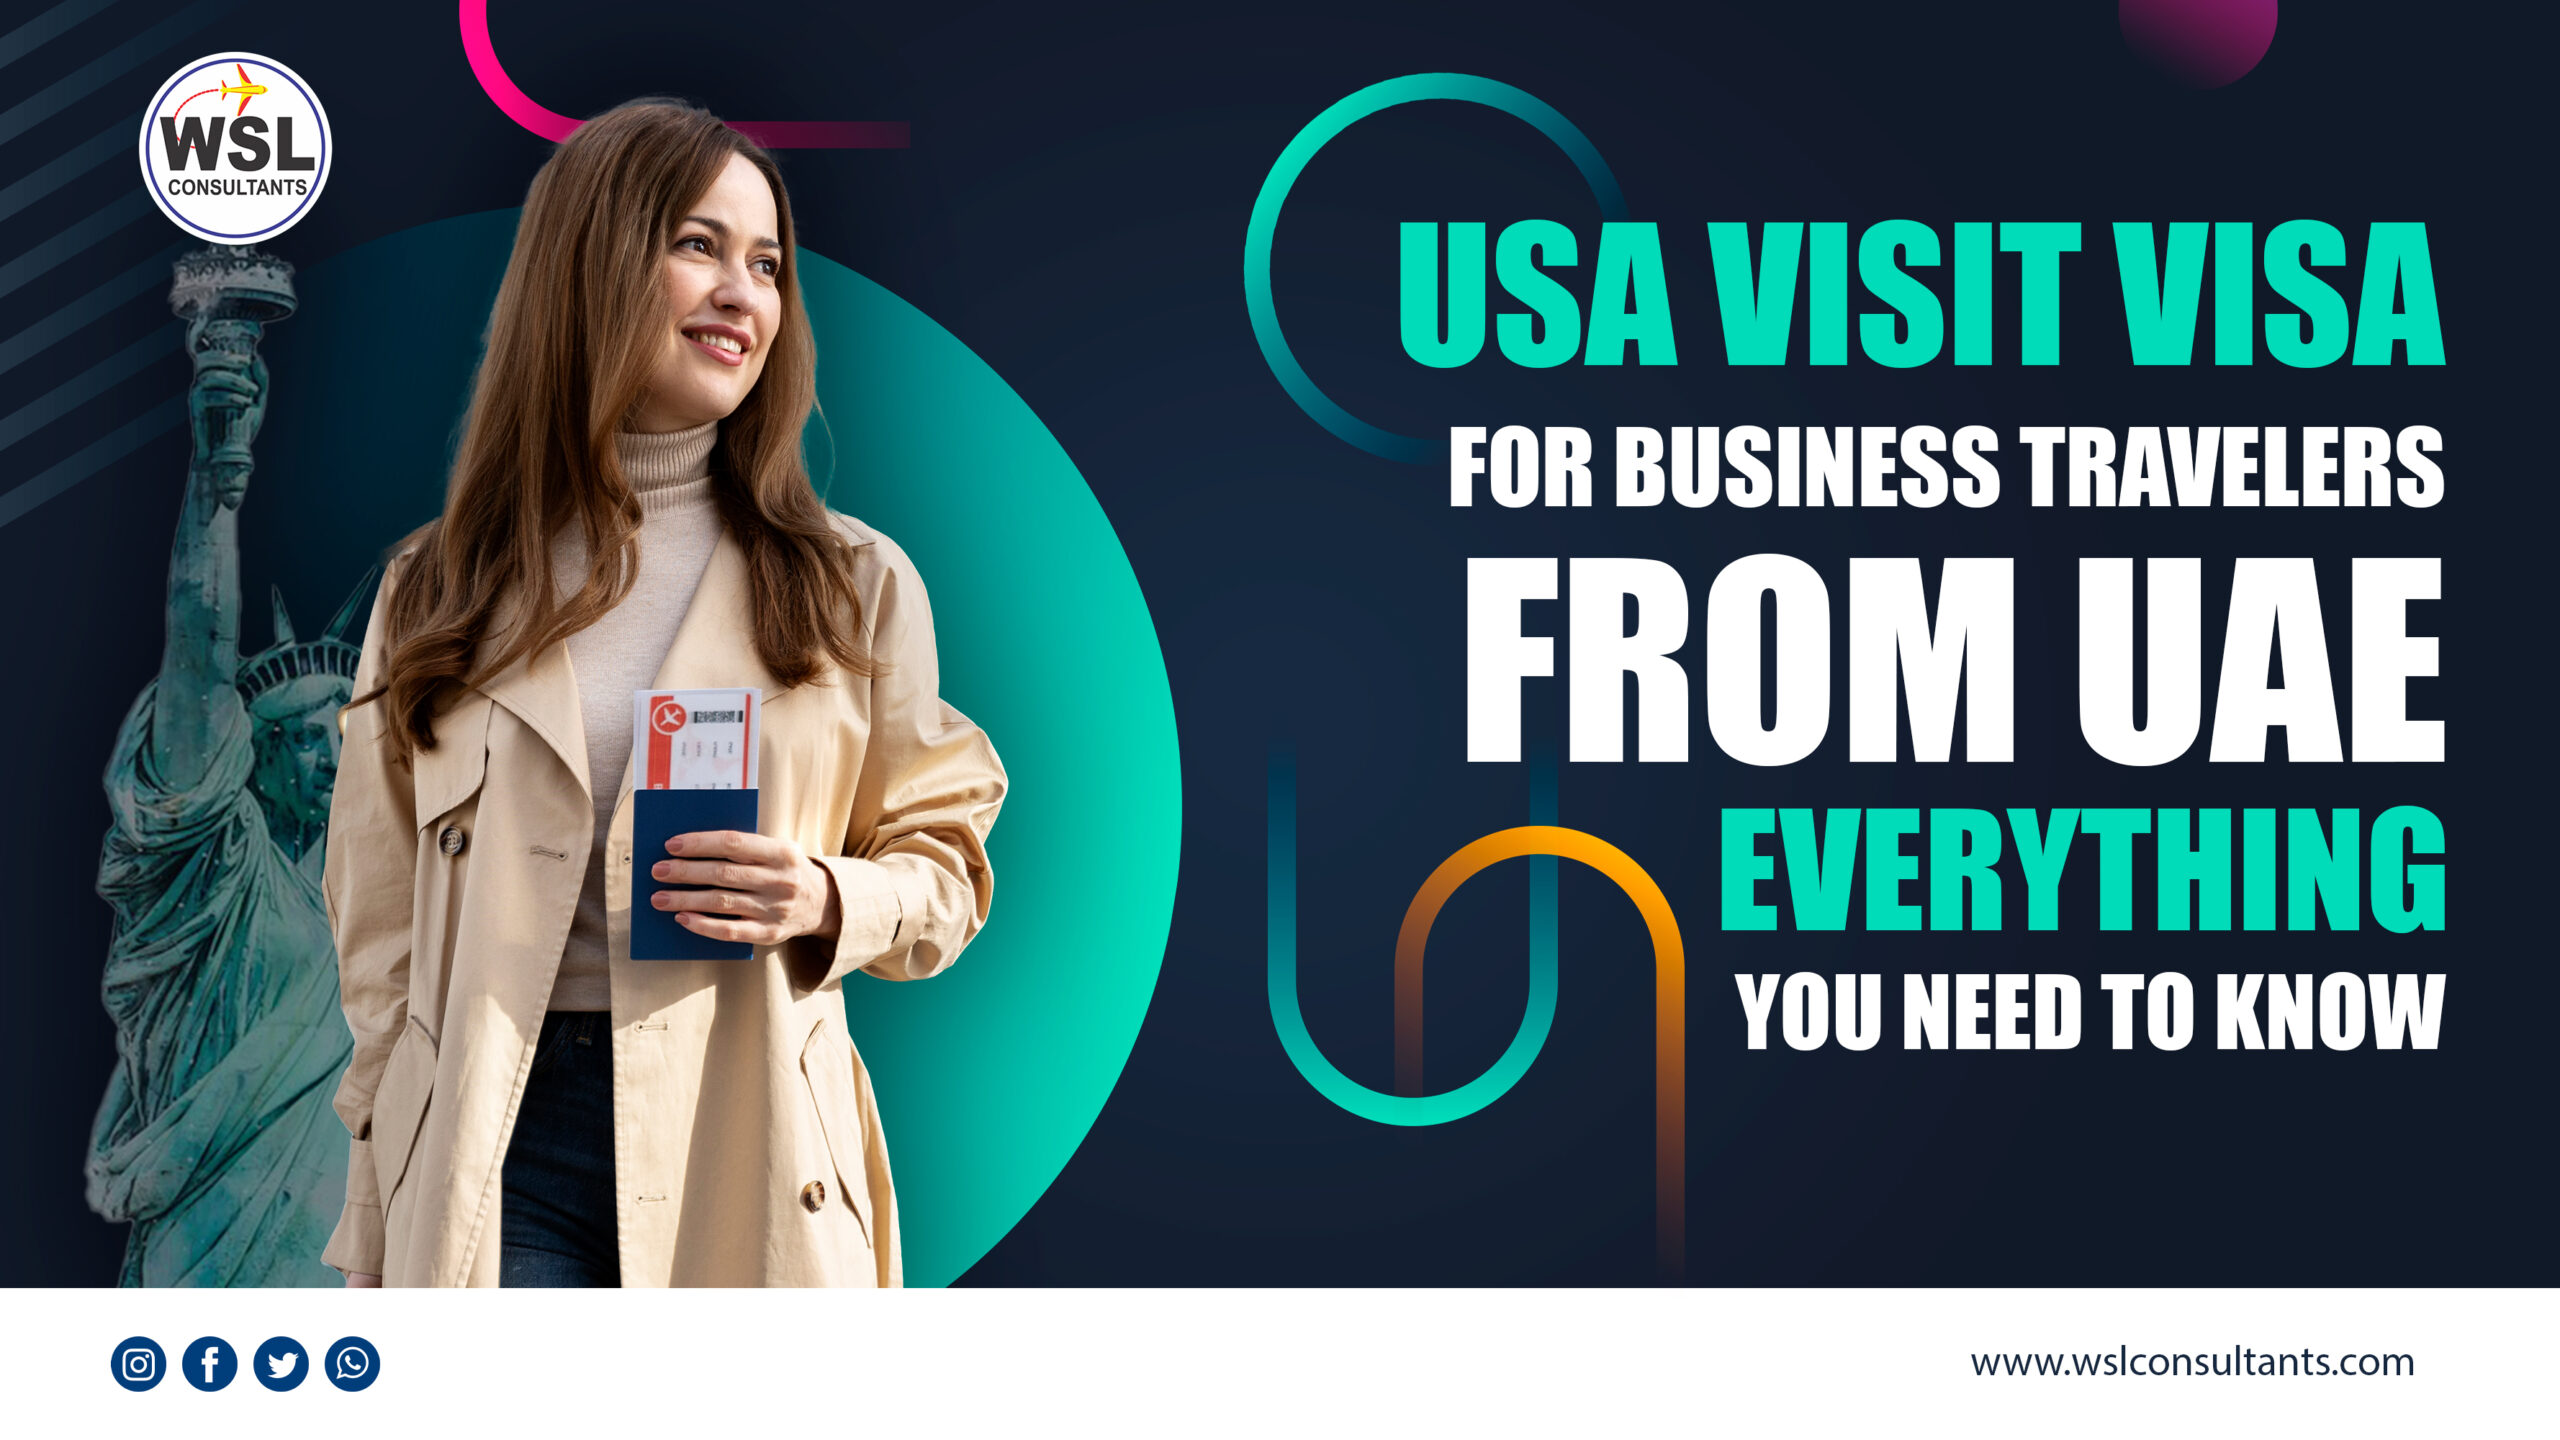 USA visit visa for business travelers from UAE: Everything you need to know